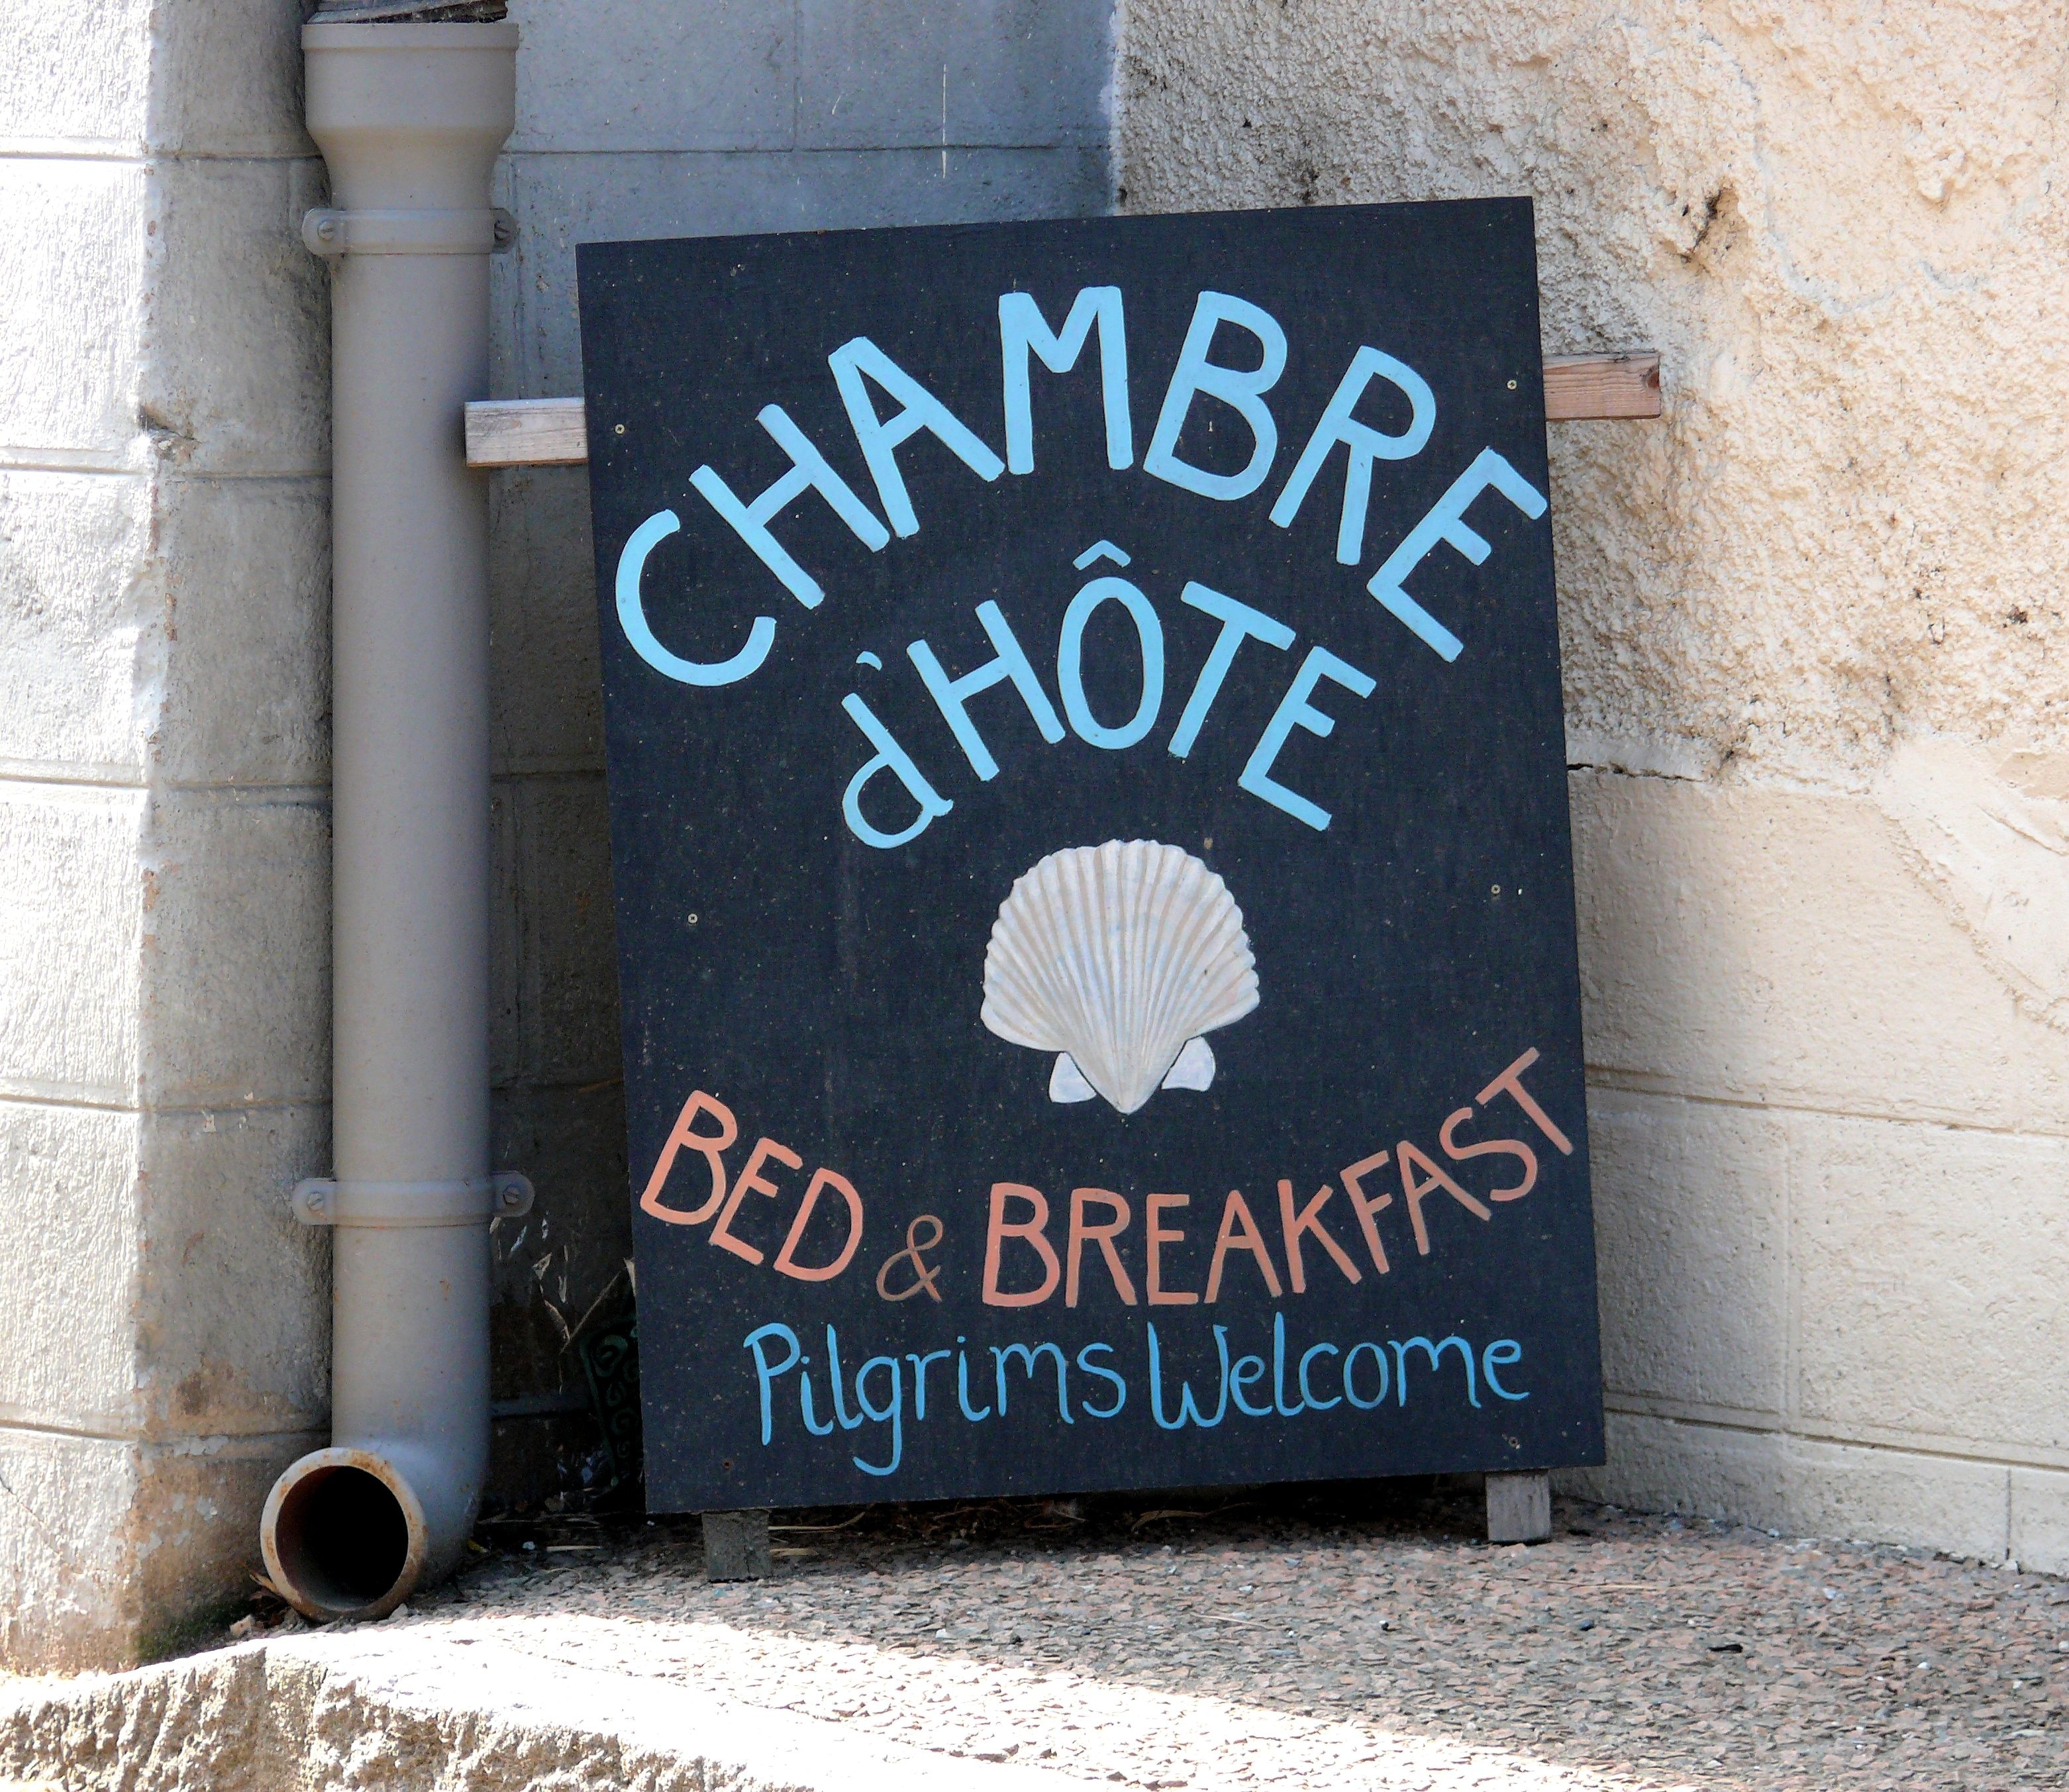 chambre dhote bed & breakfast pilgrims welcome signage